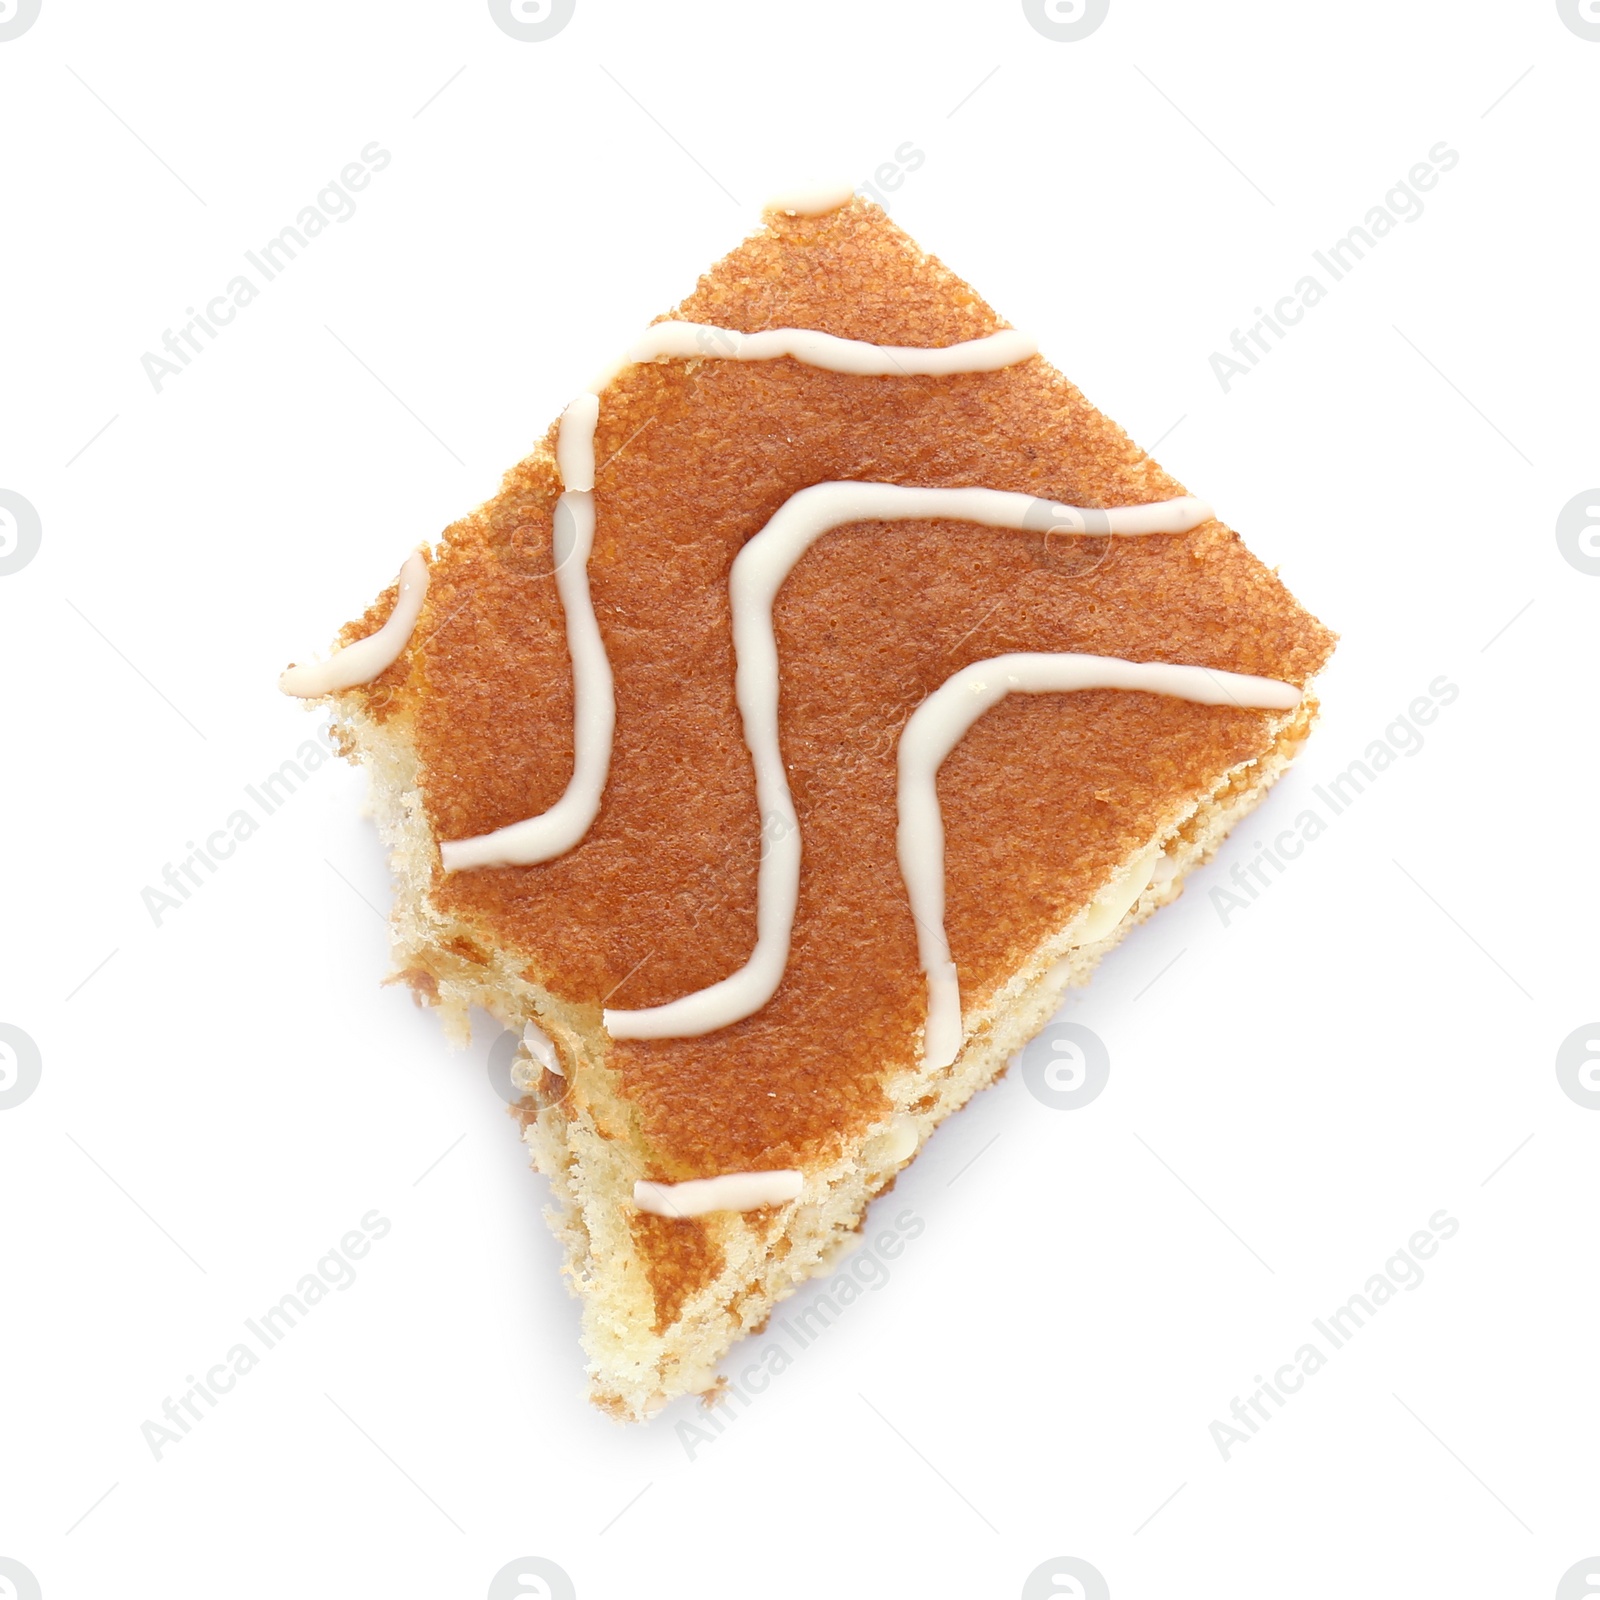 Photo of Bitten sponge cake isolated on white, top view